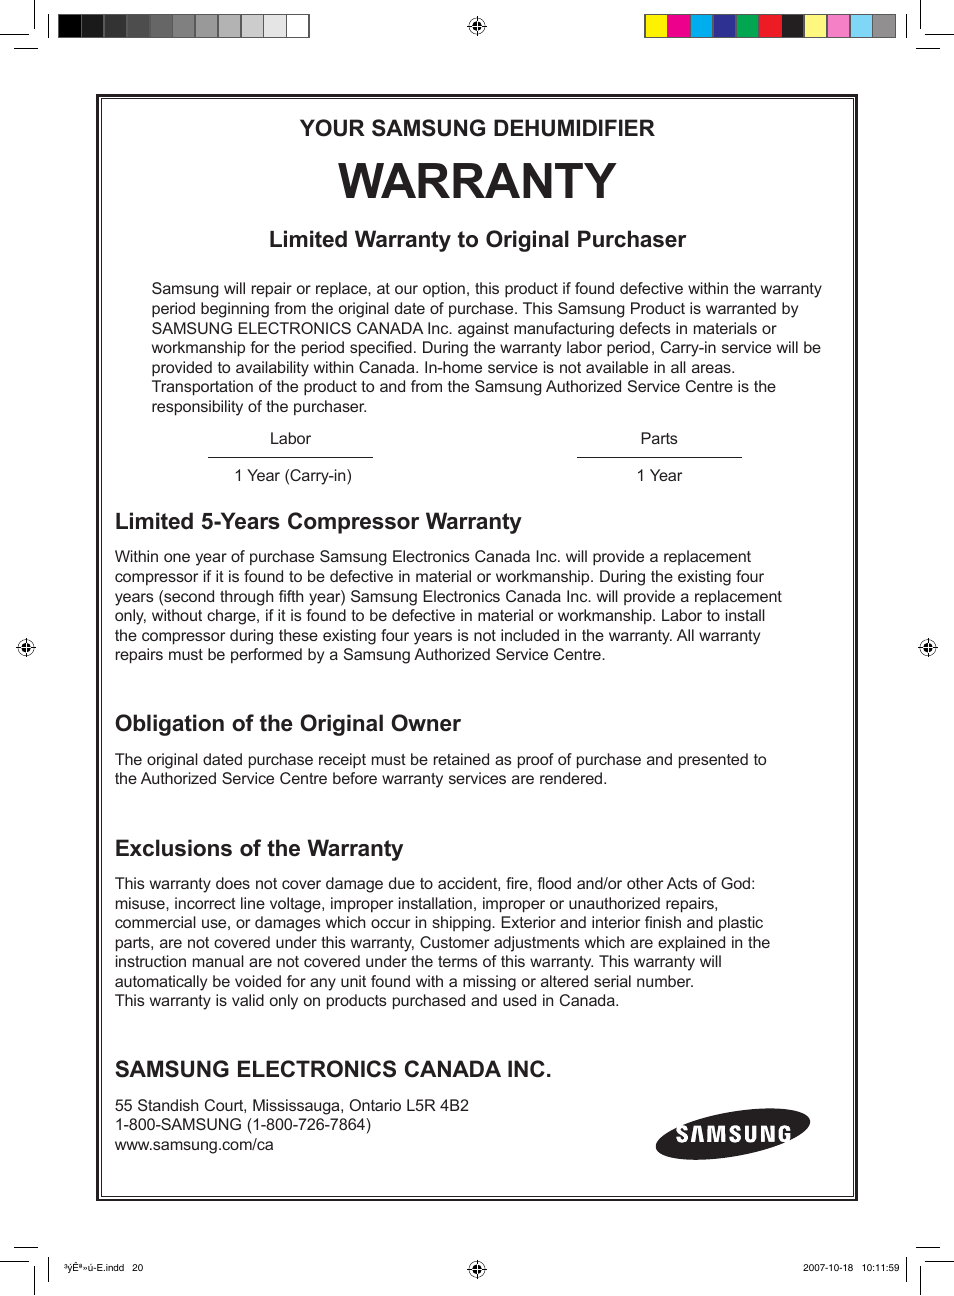 Warranty, Your samsung dehumidifier, Limited warranty to original purchaser | Limited 5-years compressor warranty, Obligation of the original owner, Exclusions of the warranty, Samsung electronics canada inc | Samsung DED50EL8 User Manual | Page 19 / 20